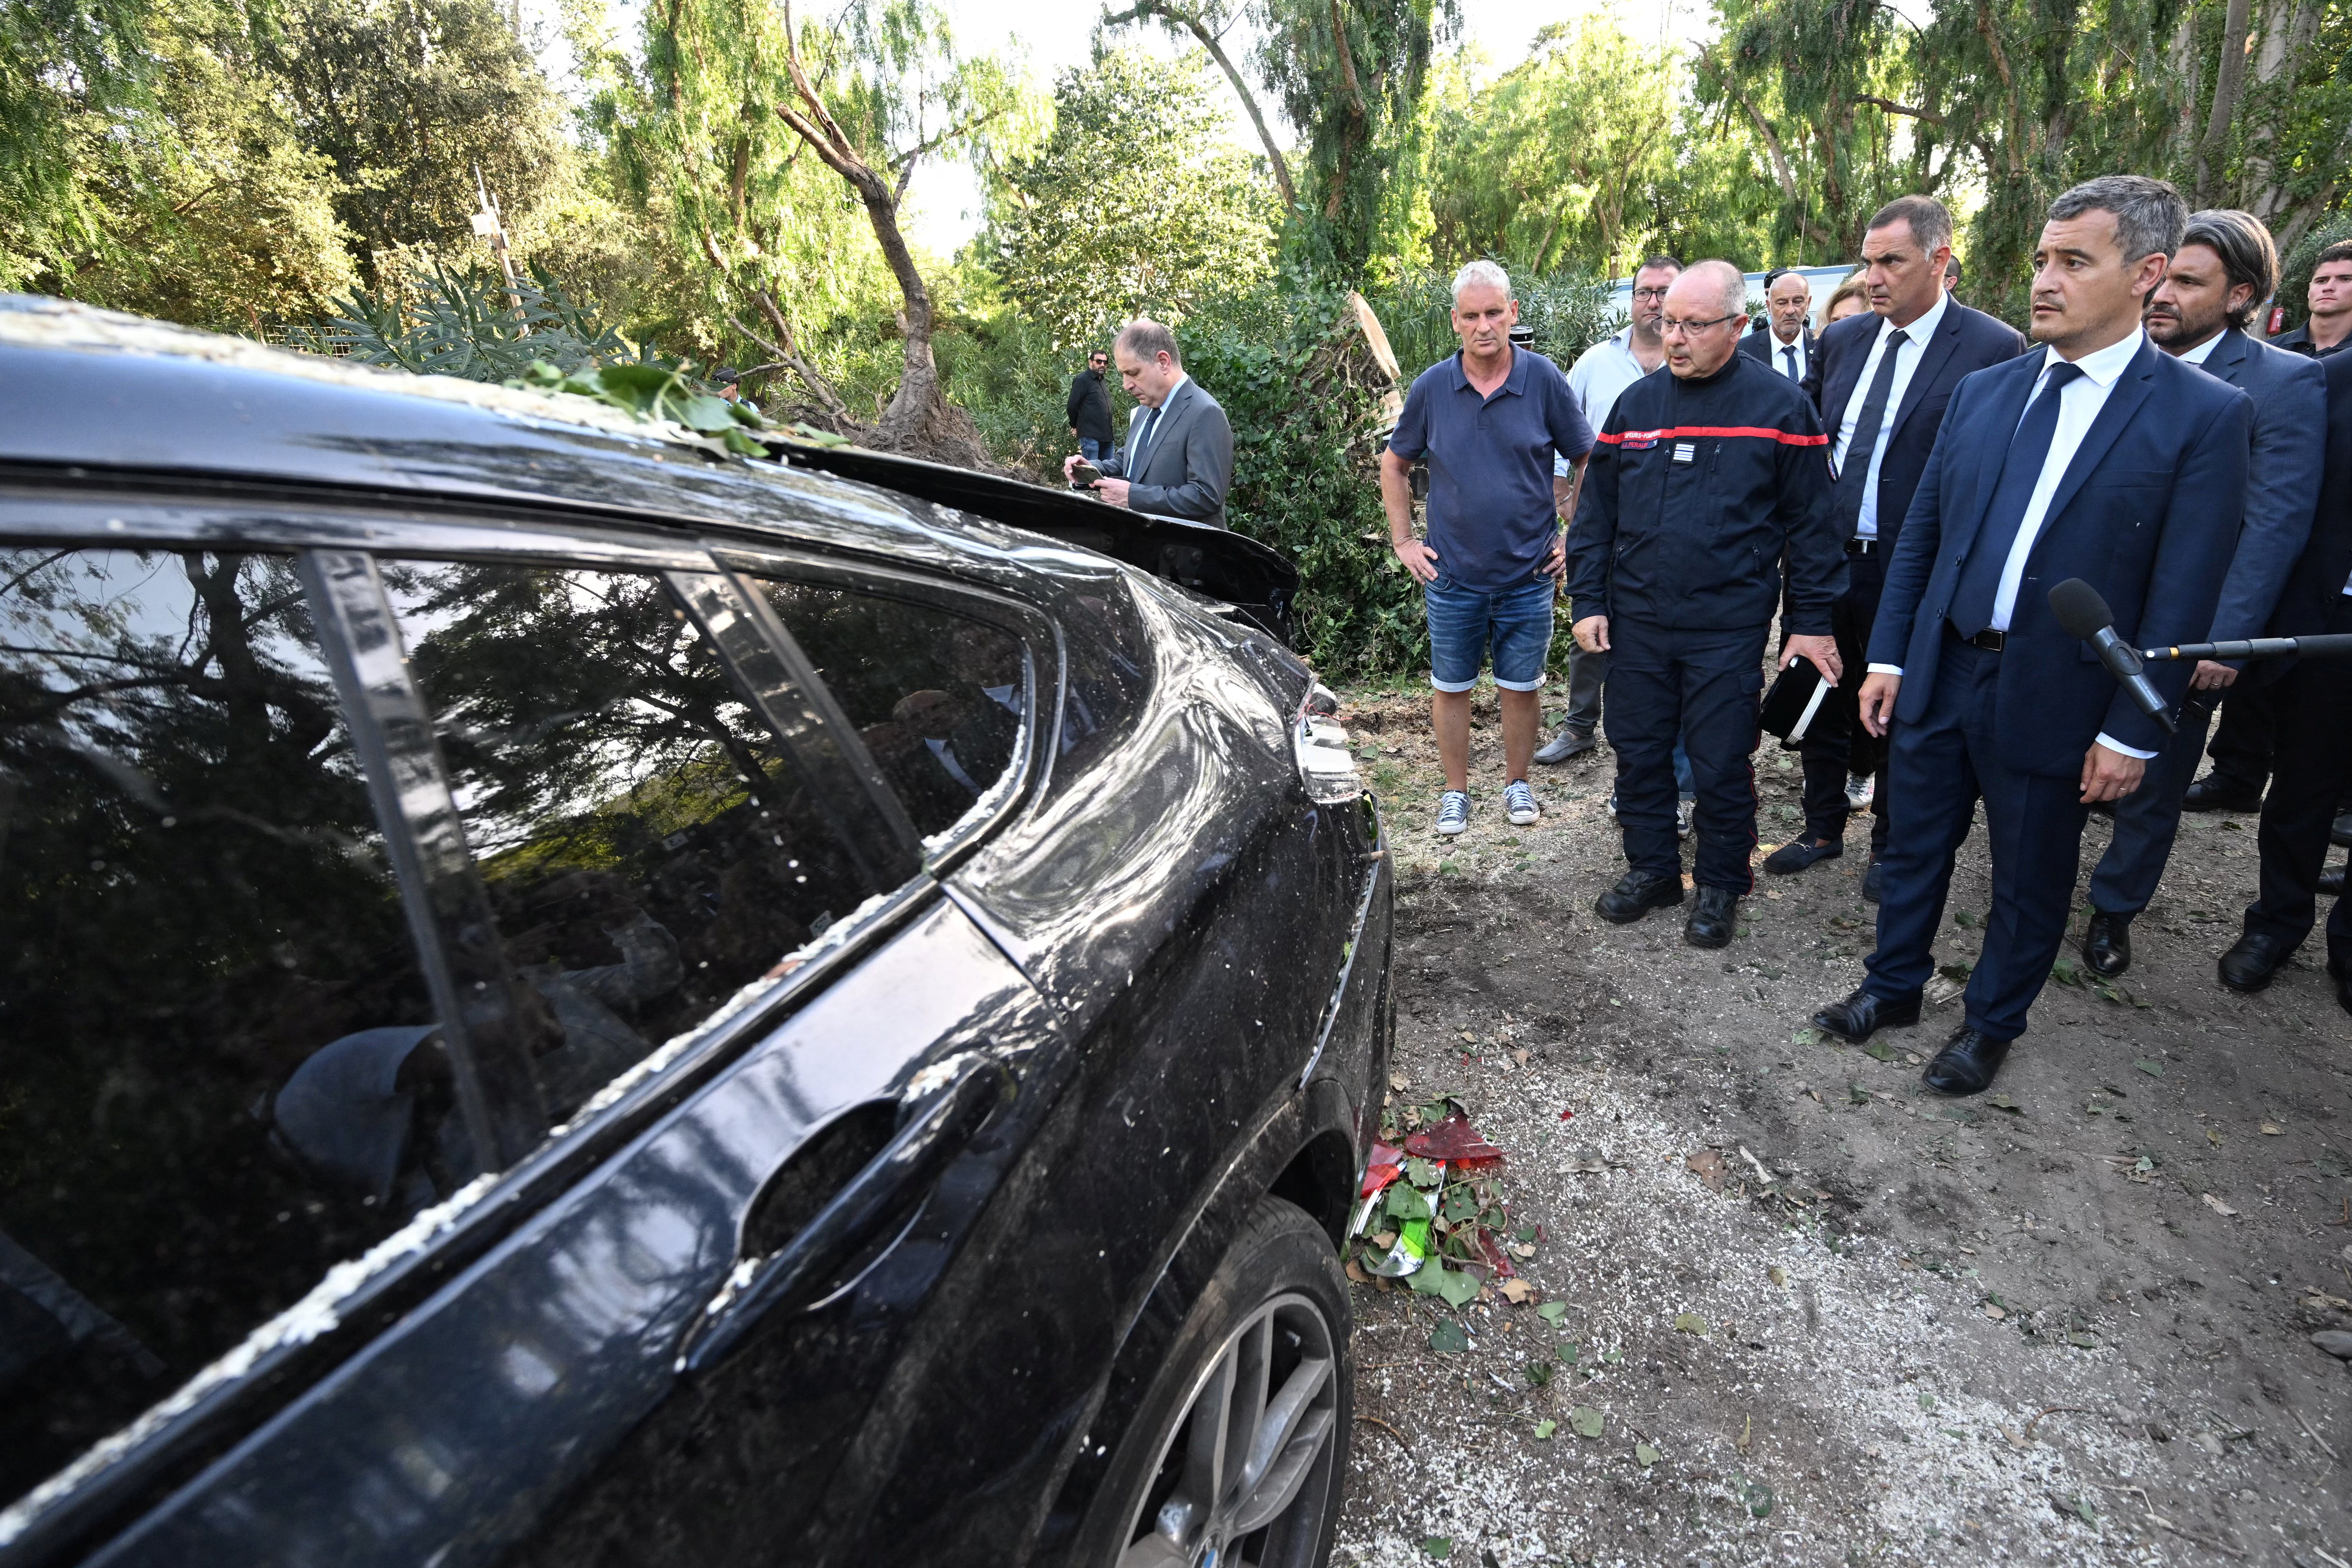 France's Interior Minister Gerald Darmanin stands by a damaged car as he visits the Sagone camping site in Sagone